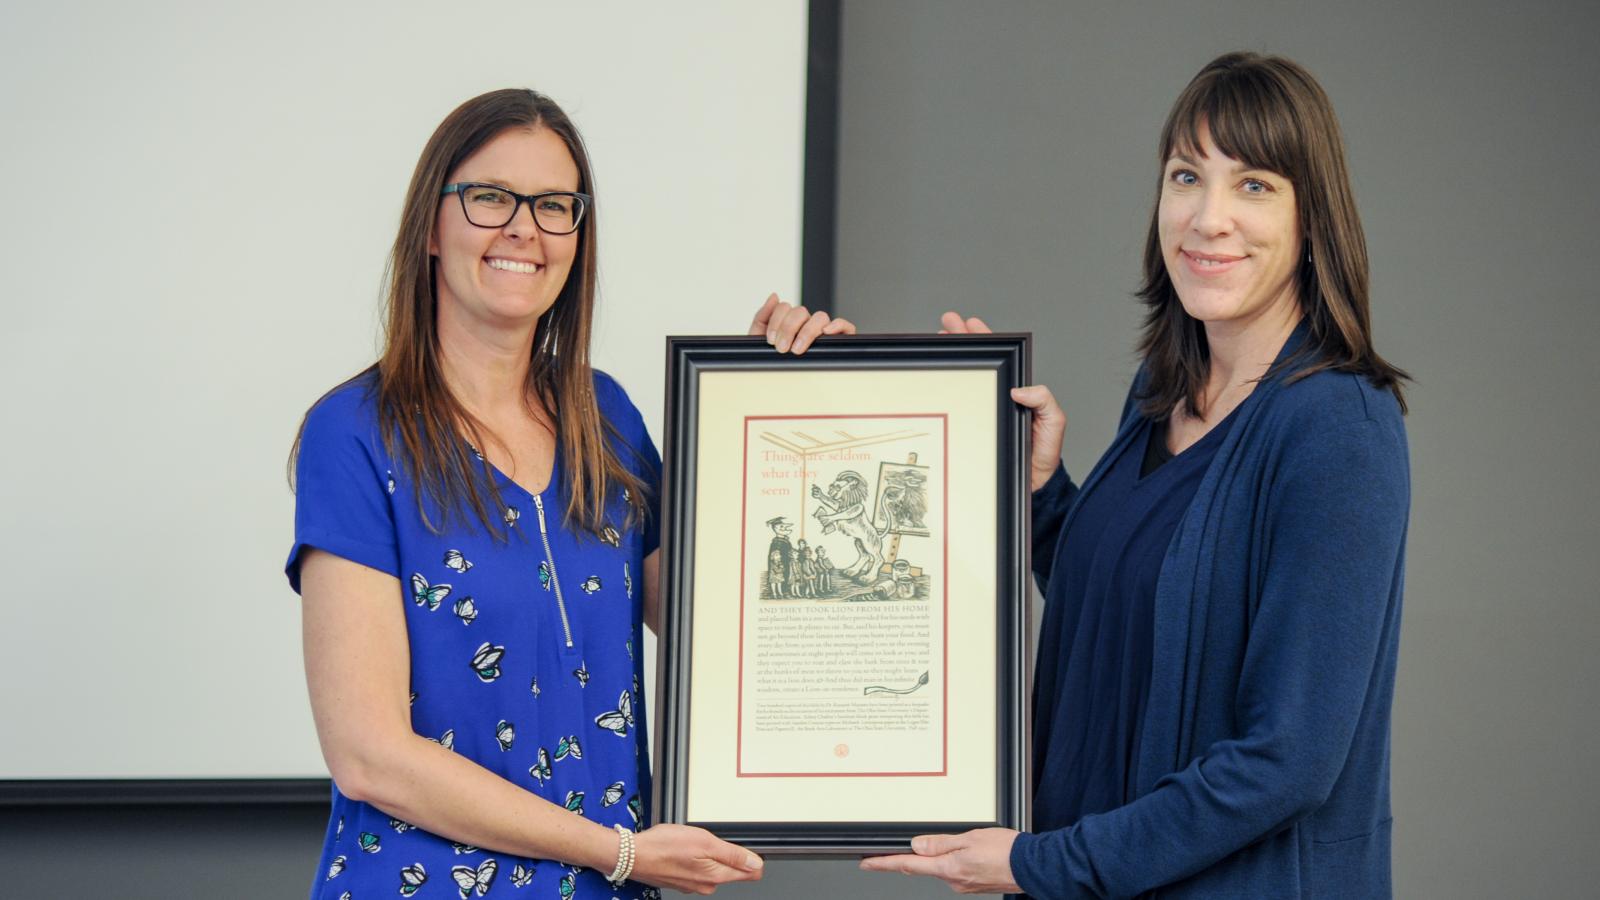 AAEP two-time alumna Dr. Amanda Alexander was honored at the 2018 Barkan and Marantz Award Ceremony for her research